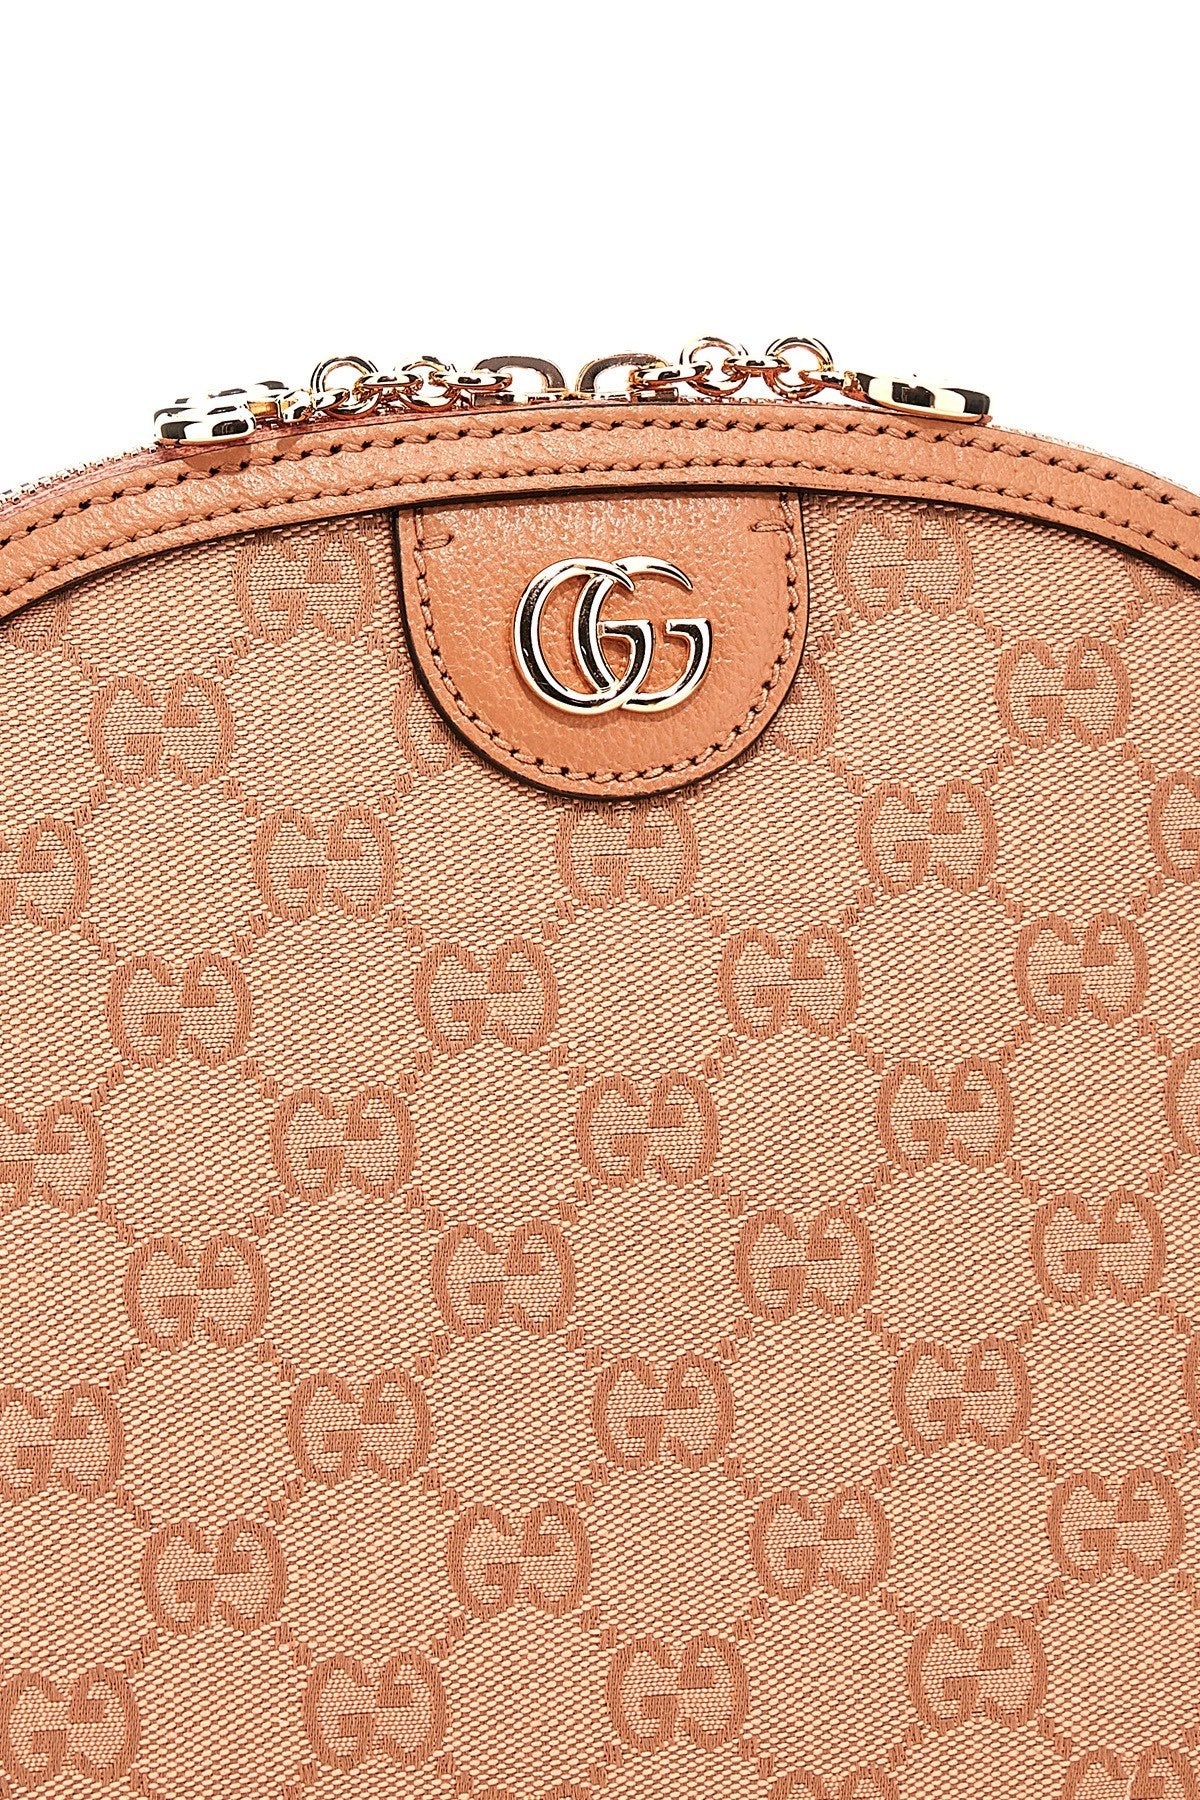 Gucci Women 'Ophidia Gg' Small Shoulder Bag - 3